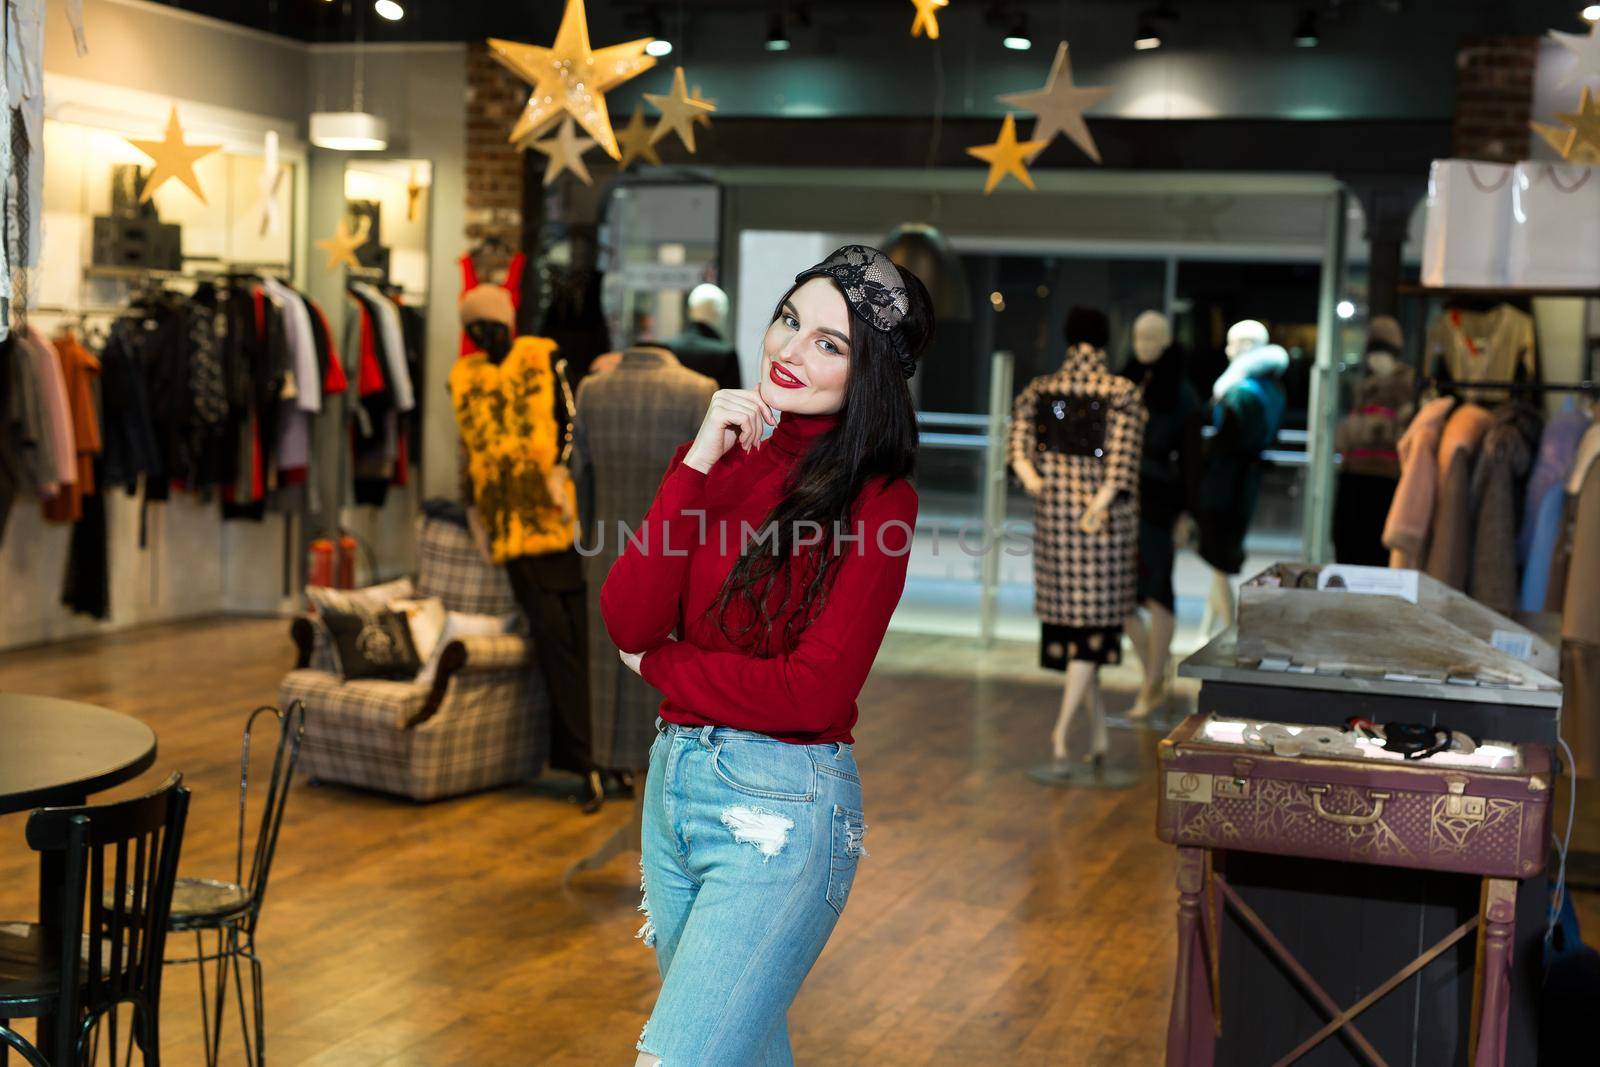 Portrait of model woman in sleeping mask. Pretty young woman happily smiling and posing in clothing store